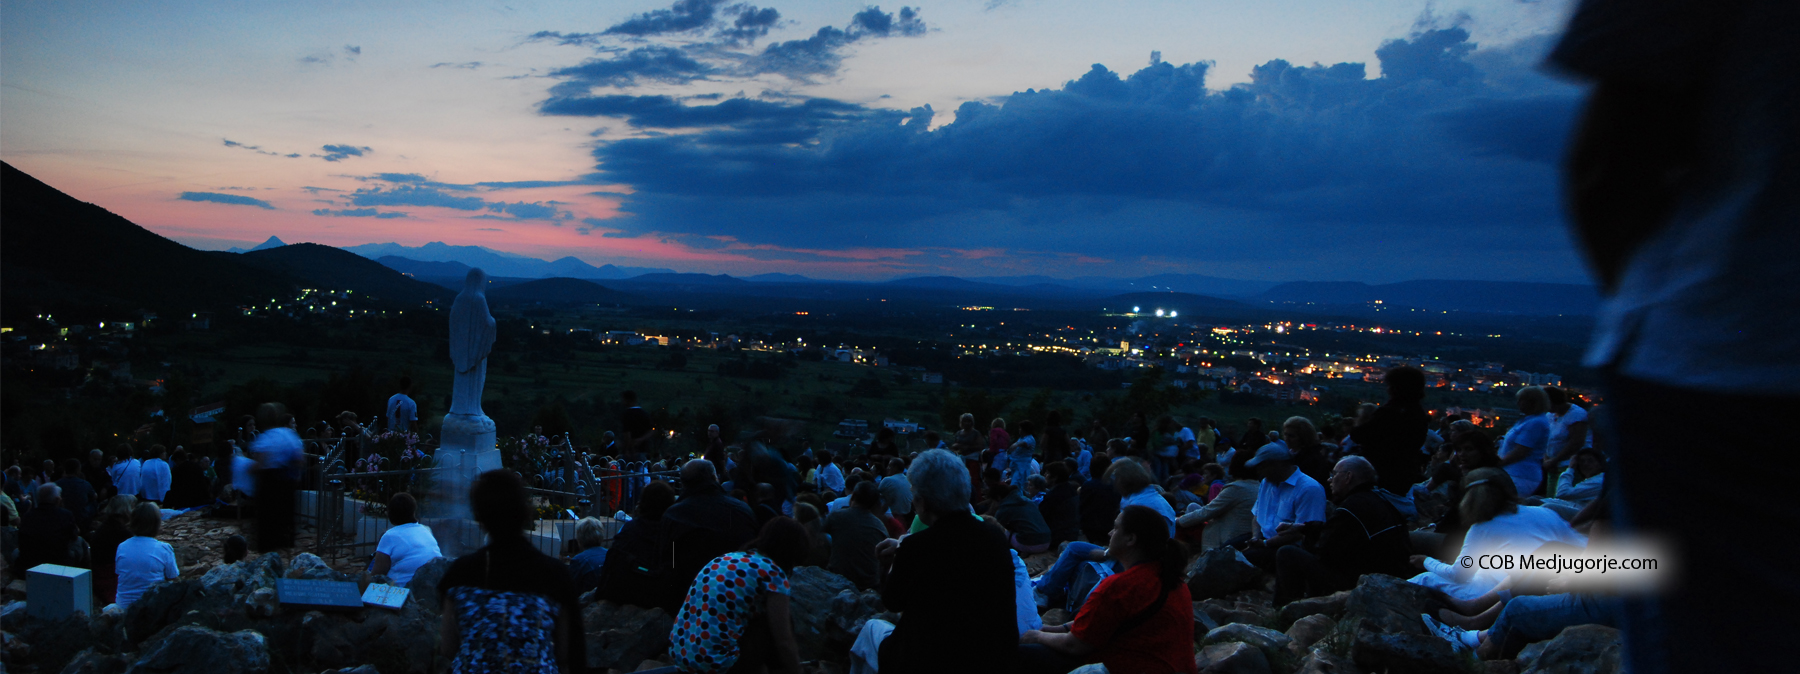 Pilgrims await Our Lady on Apparition Mountain in Medjugorje